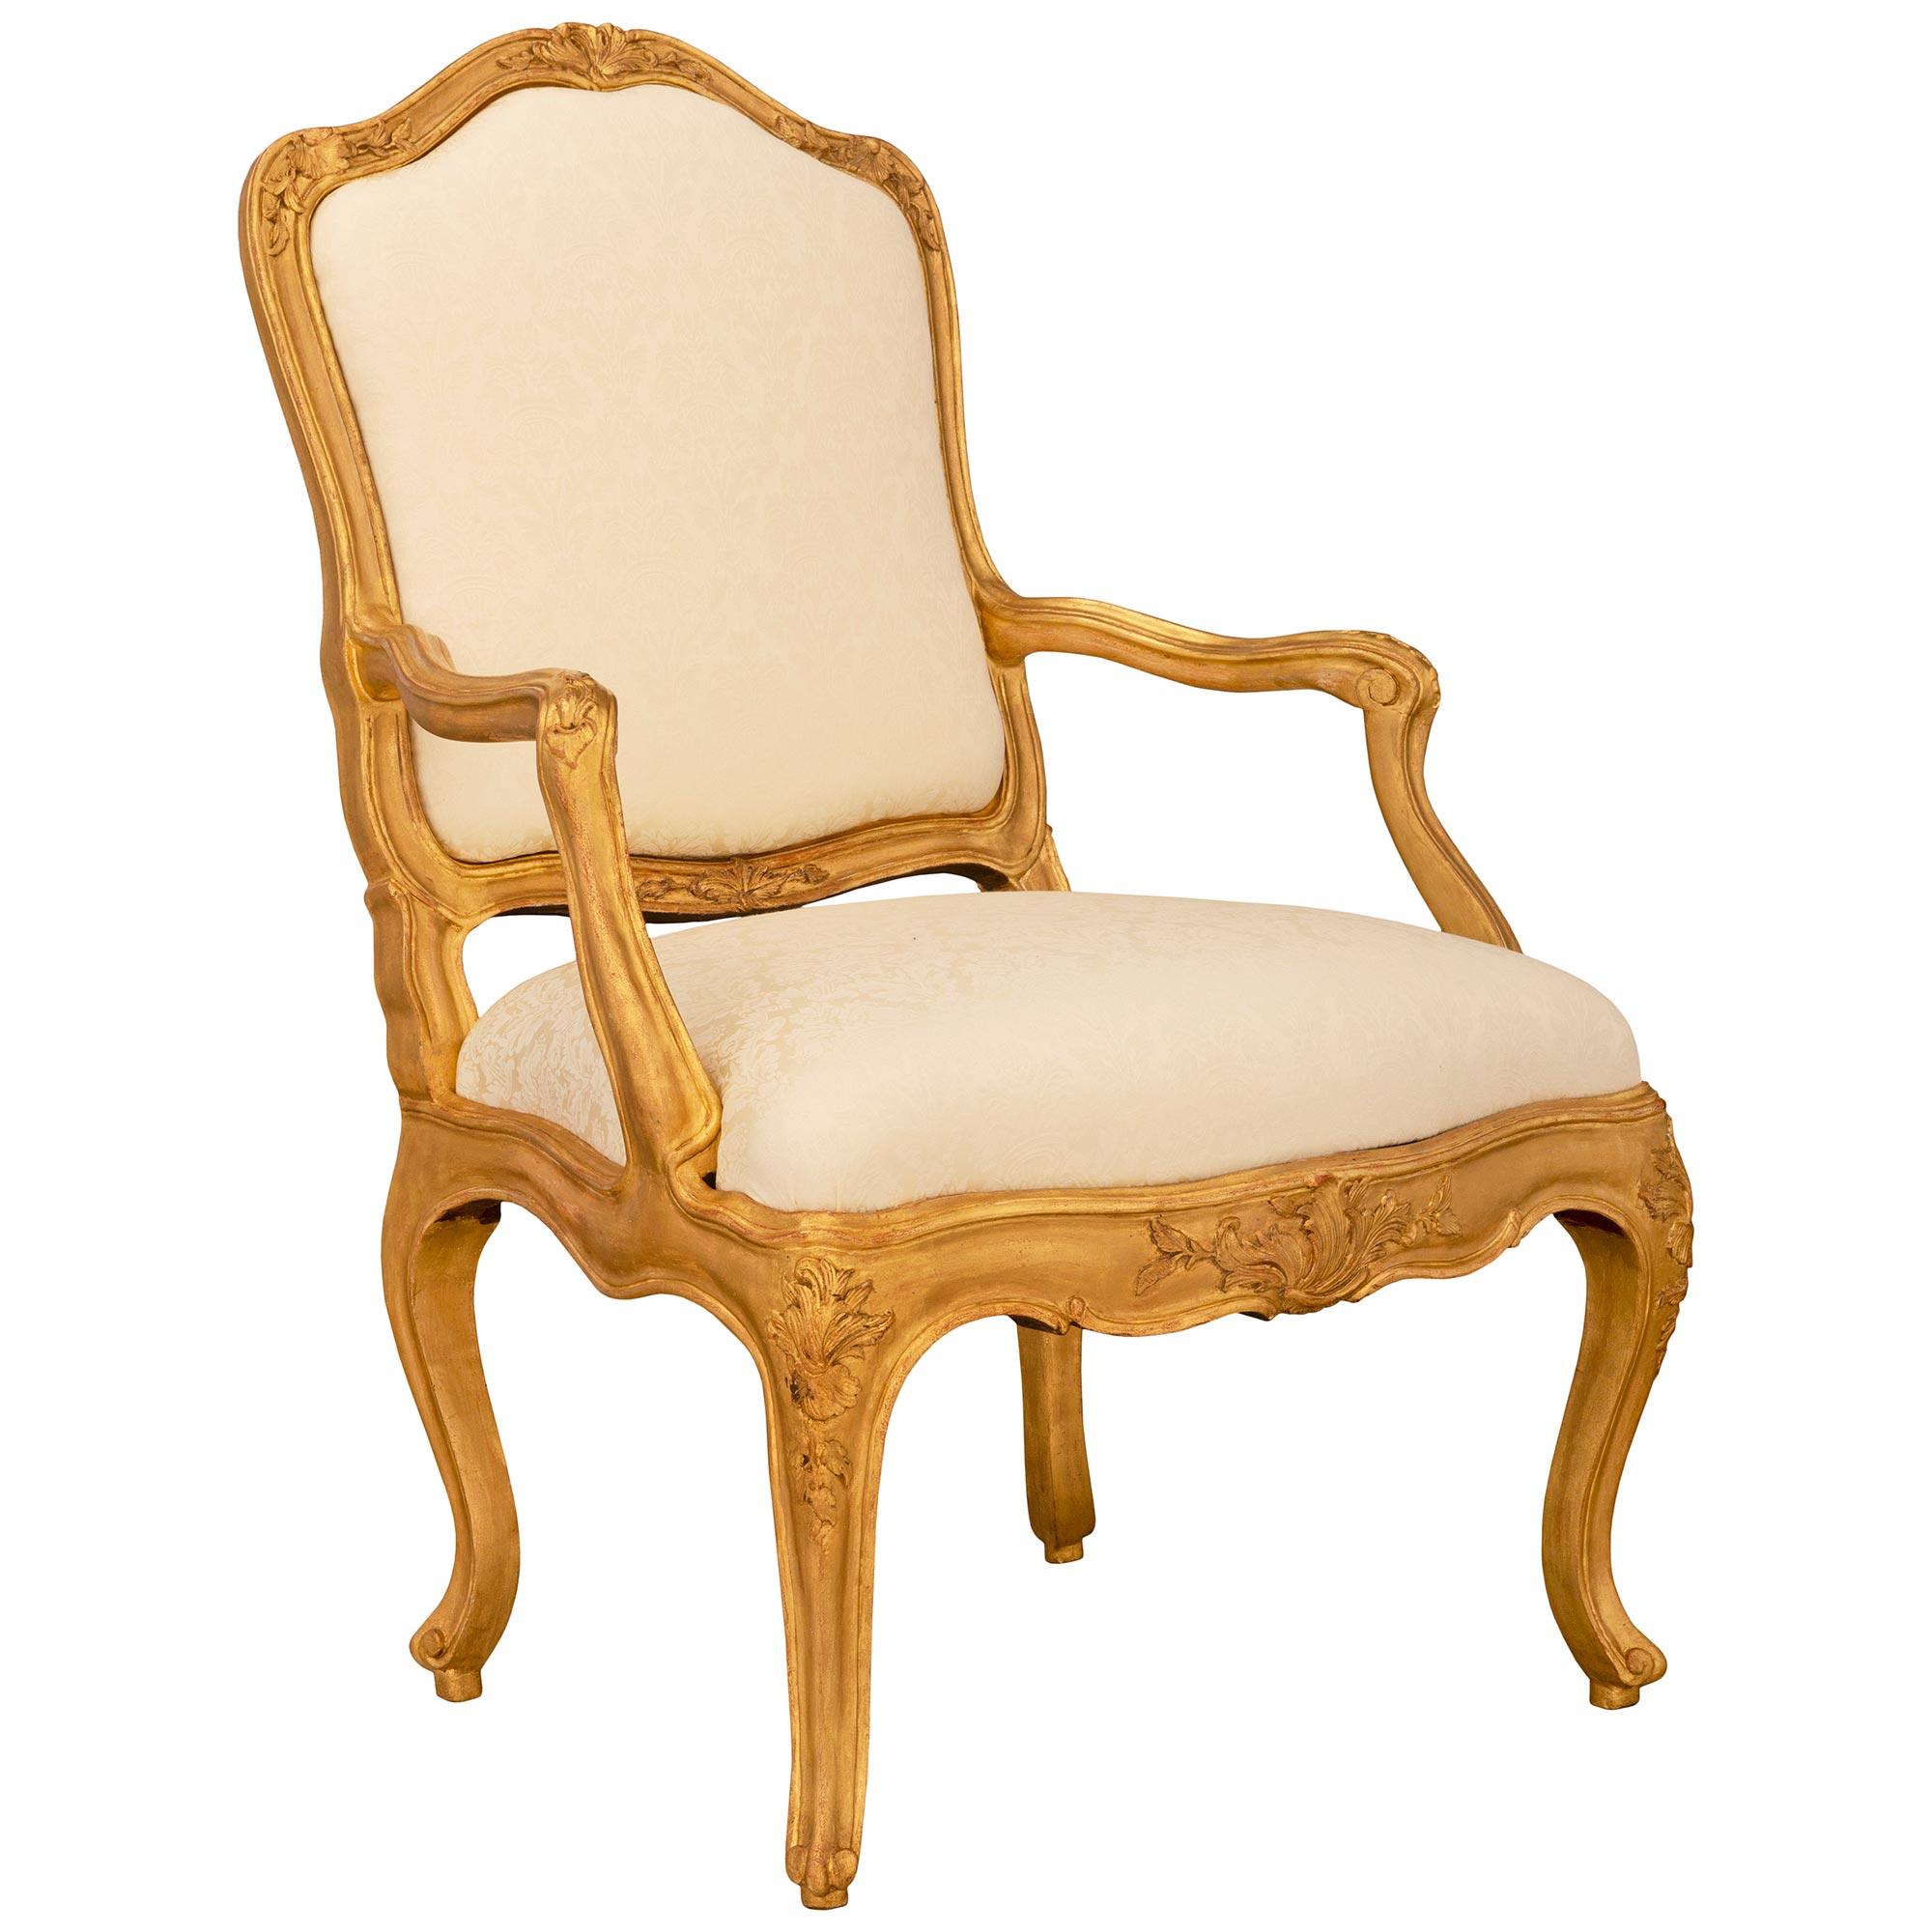 An elegant pair of Italian 18th century Louis XV period giltwood armchairs. Each armchair is raised by slender cabriole legs with fine scrolled feet and beautiful foliate corner designs. A delicate fillet extends up each leg and along the scalloped